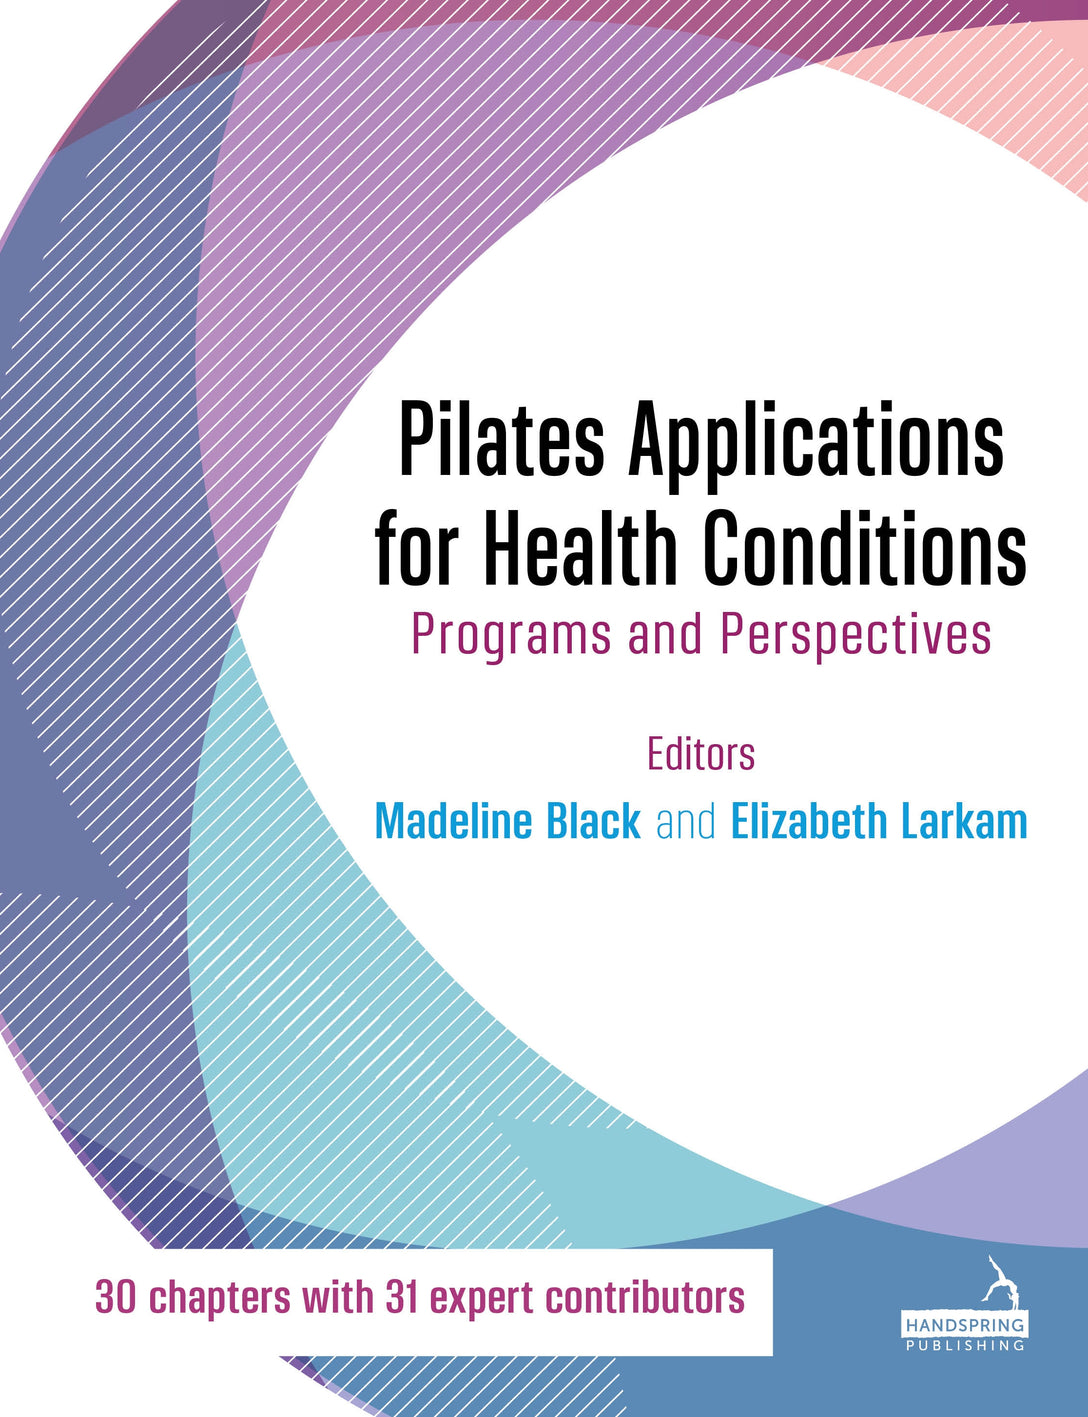 Pilates Applications for Health Conditions by Madeline Black, Elizabeth Larkam